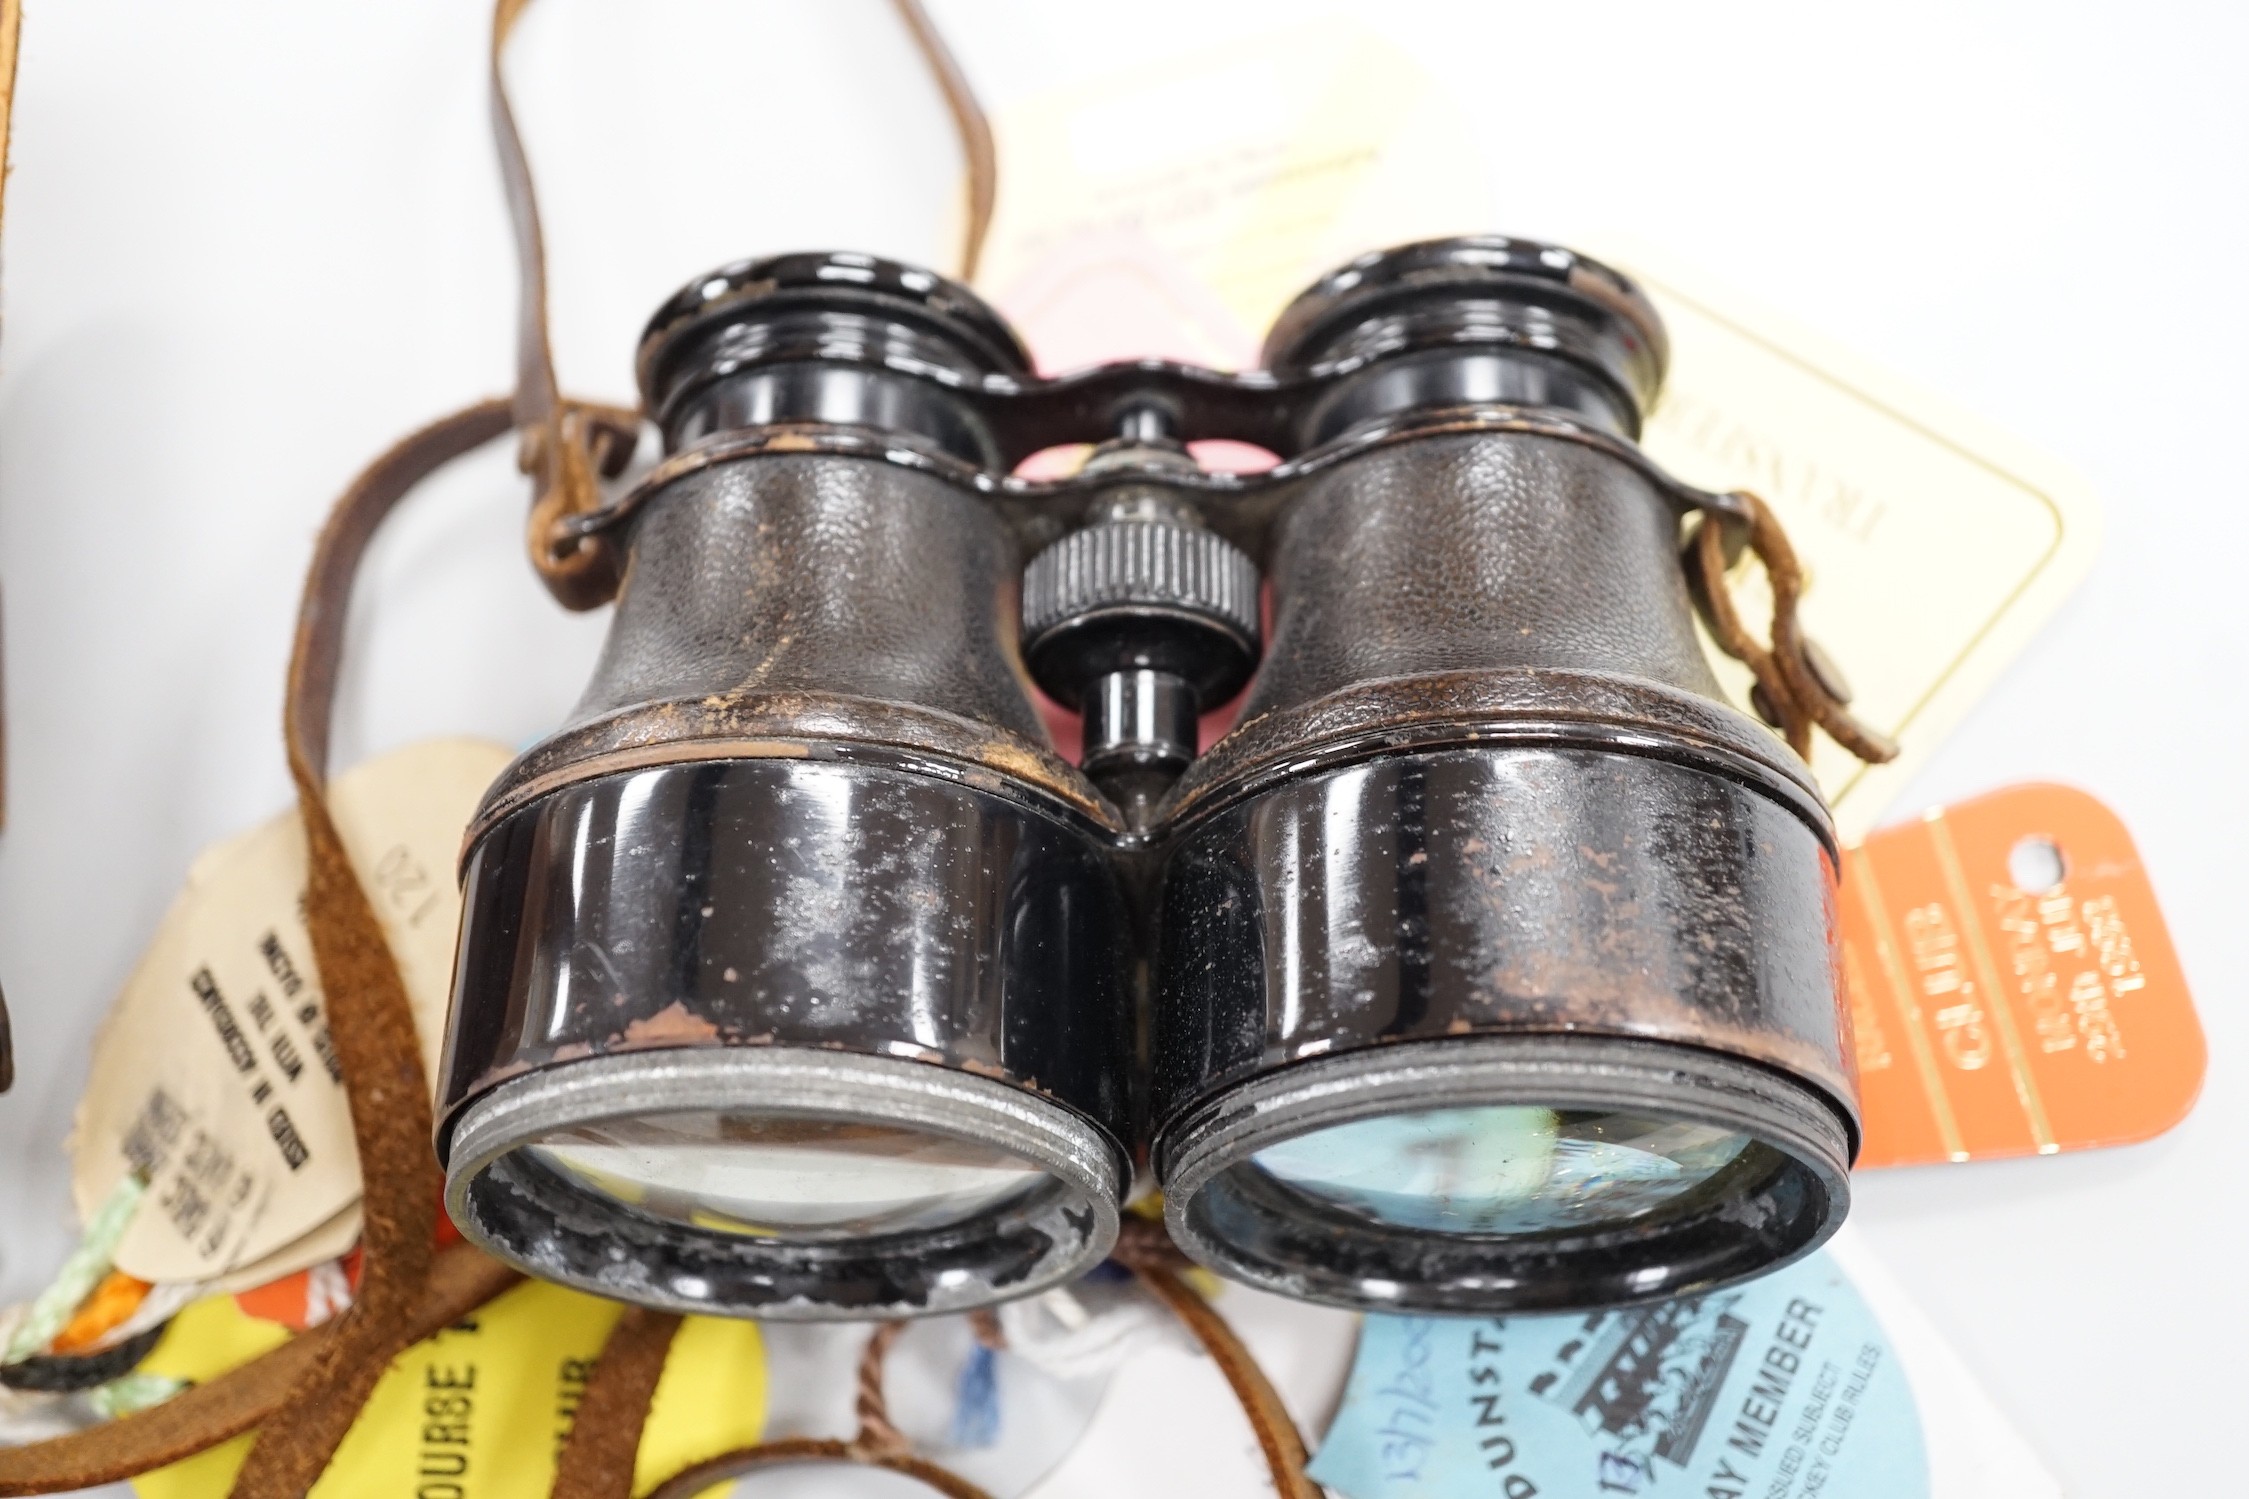 A pair of French binoculars in case, with various race meeting badges